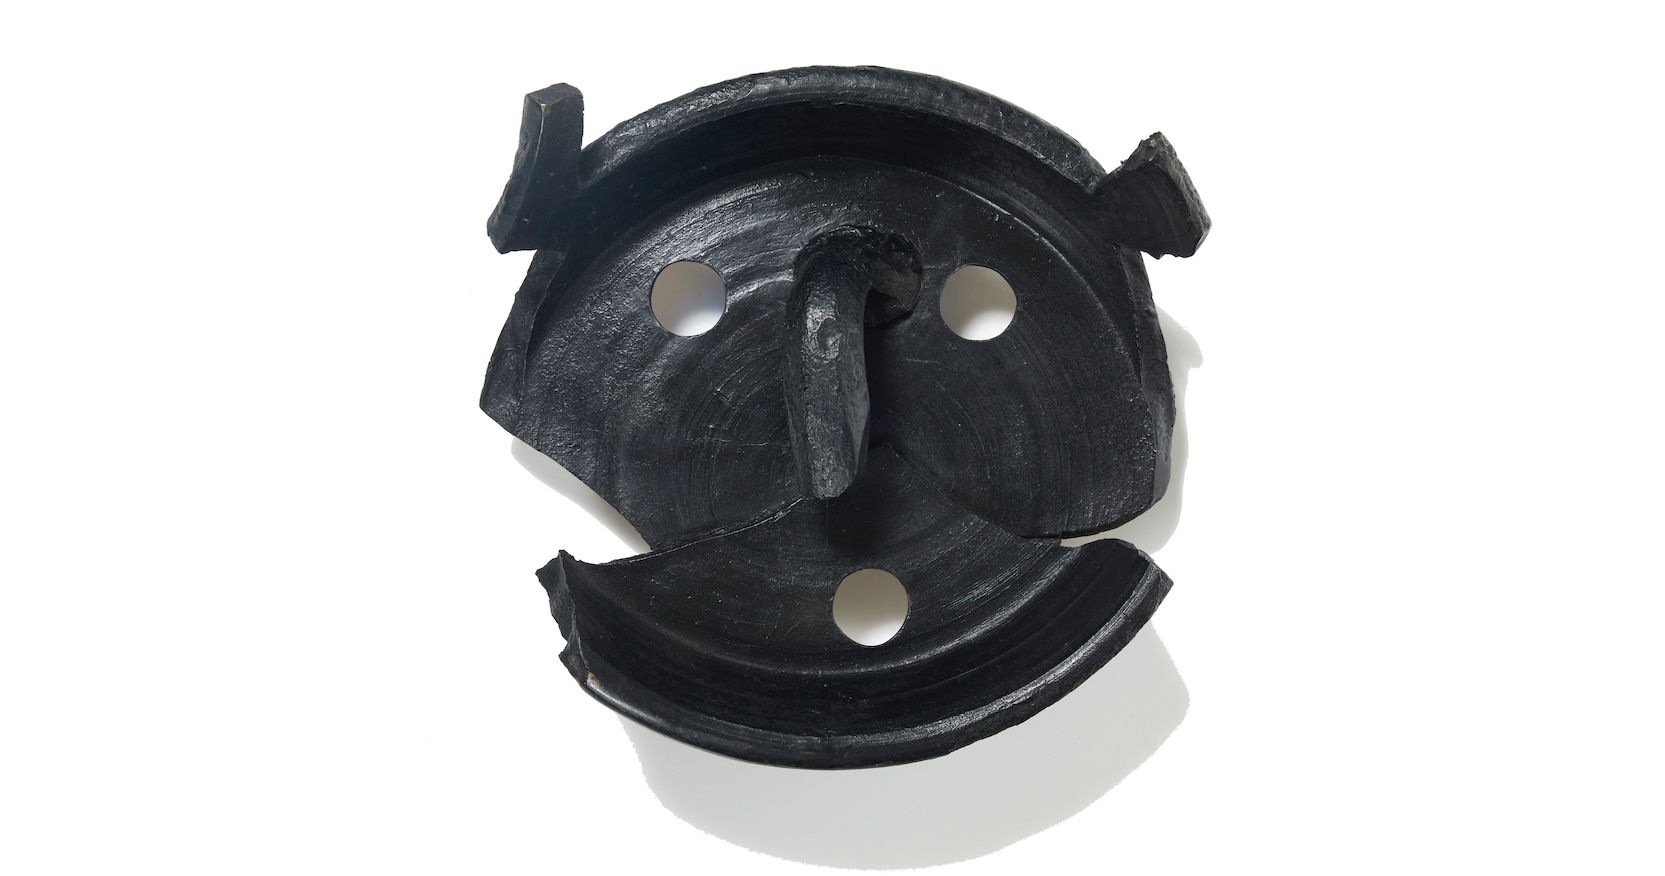 Eric Schmitt, round wall lamp in black bronze in the shape of a funny face, 2022